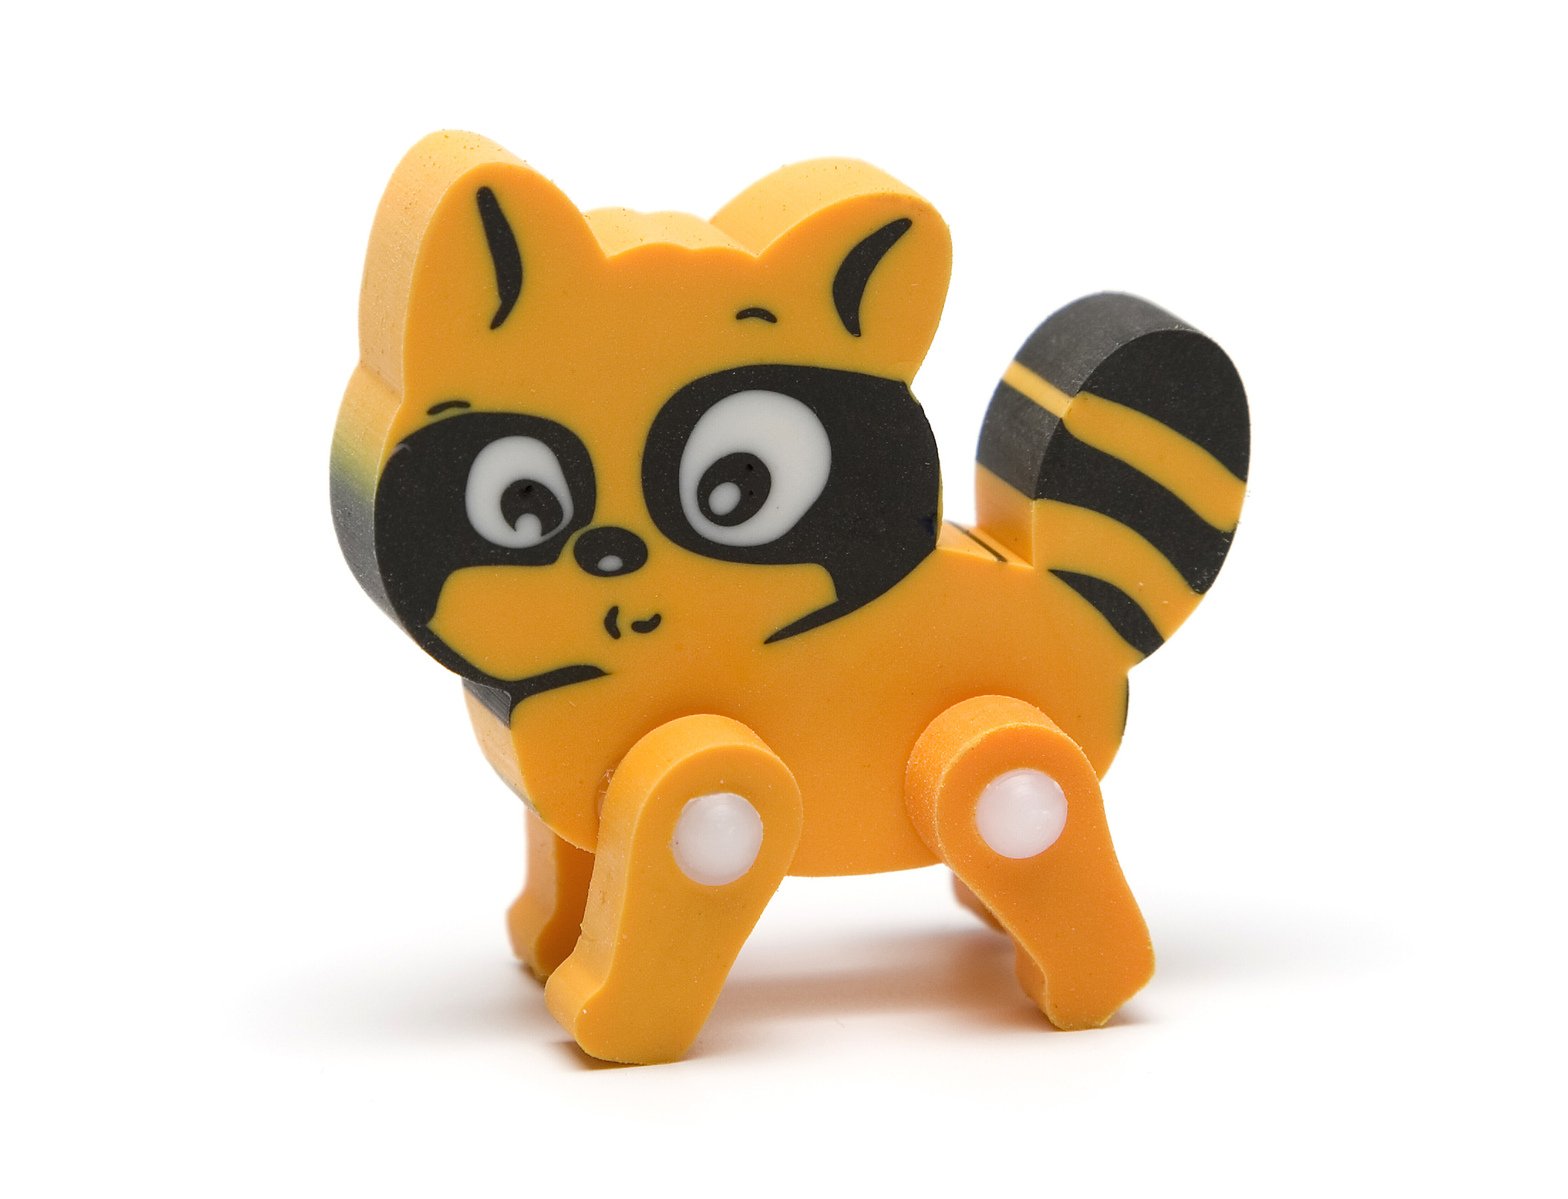 a small yellow toy with black and yellow stripes